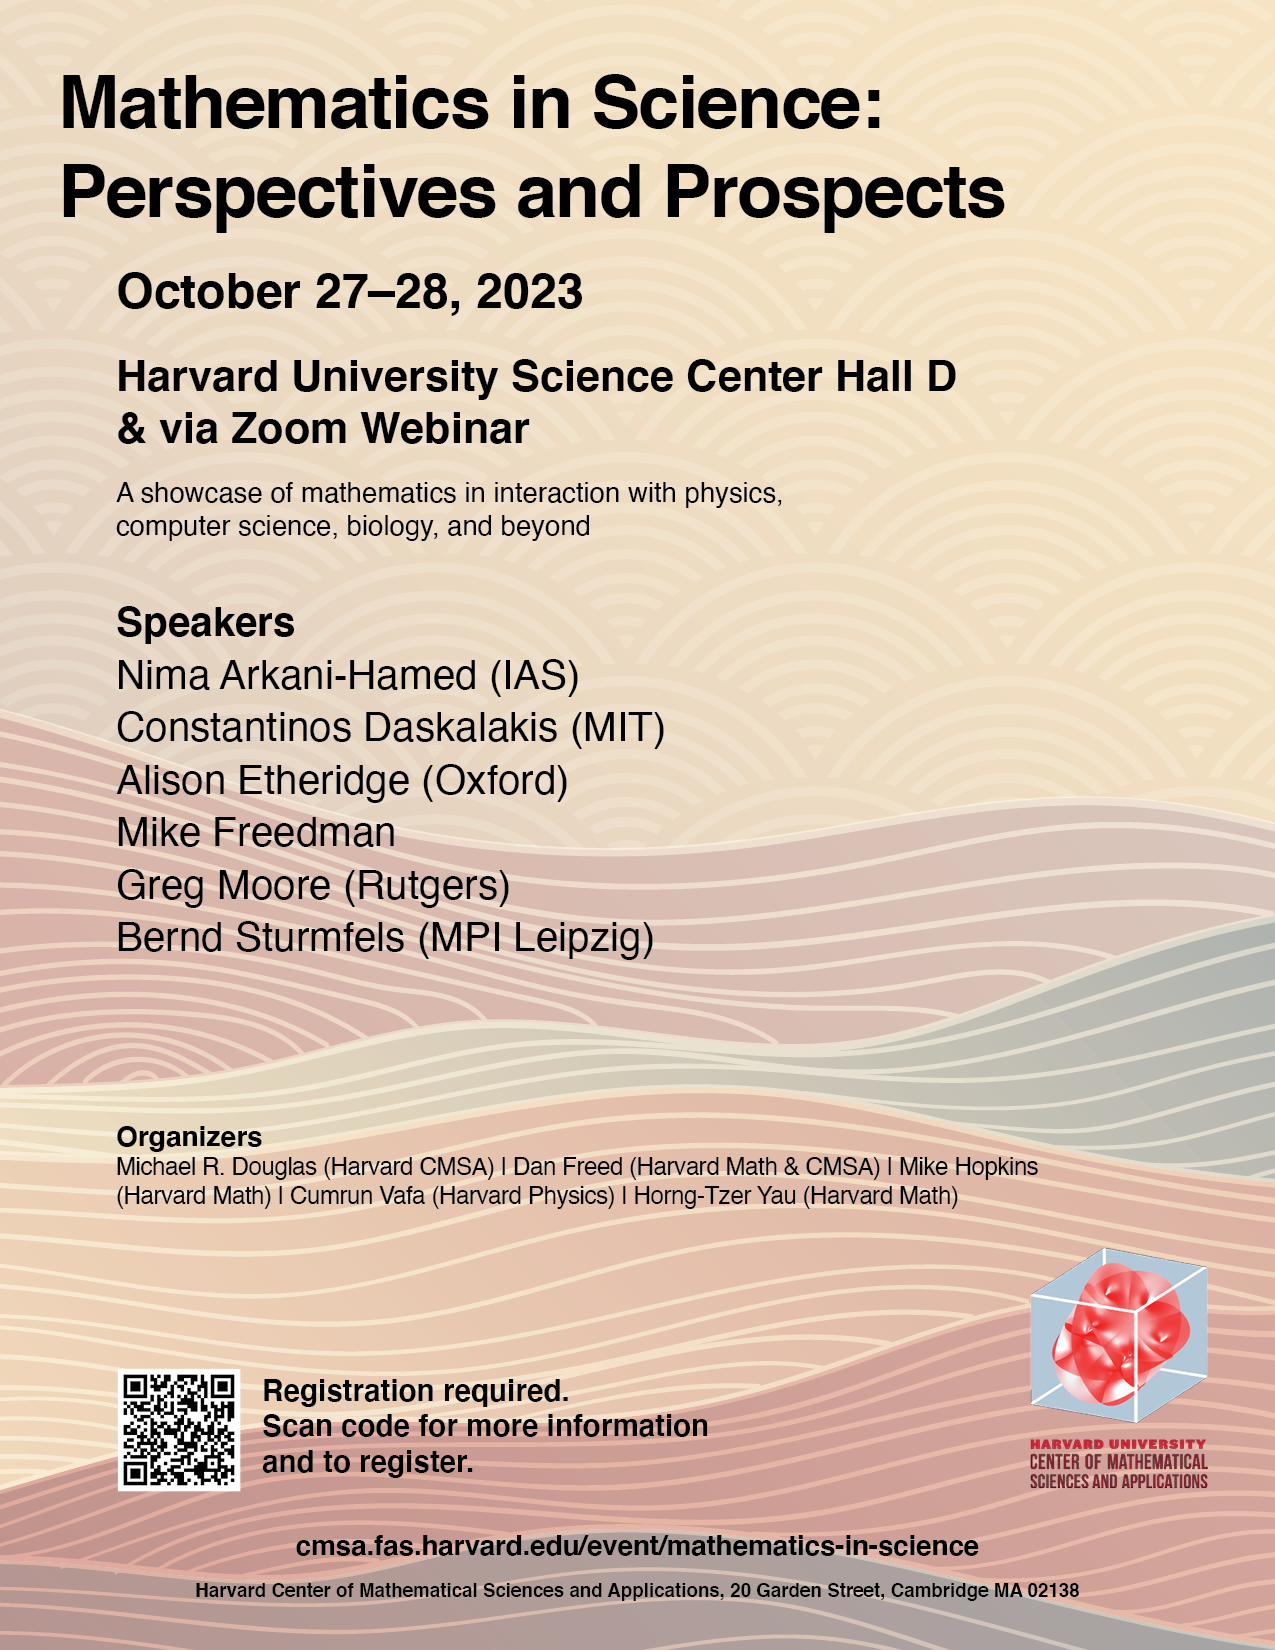 Mathematics in Science: Perspectives and Prospects